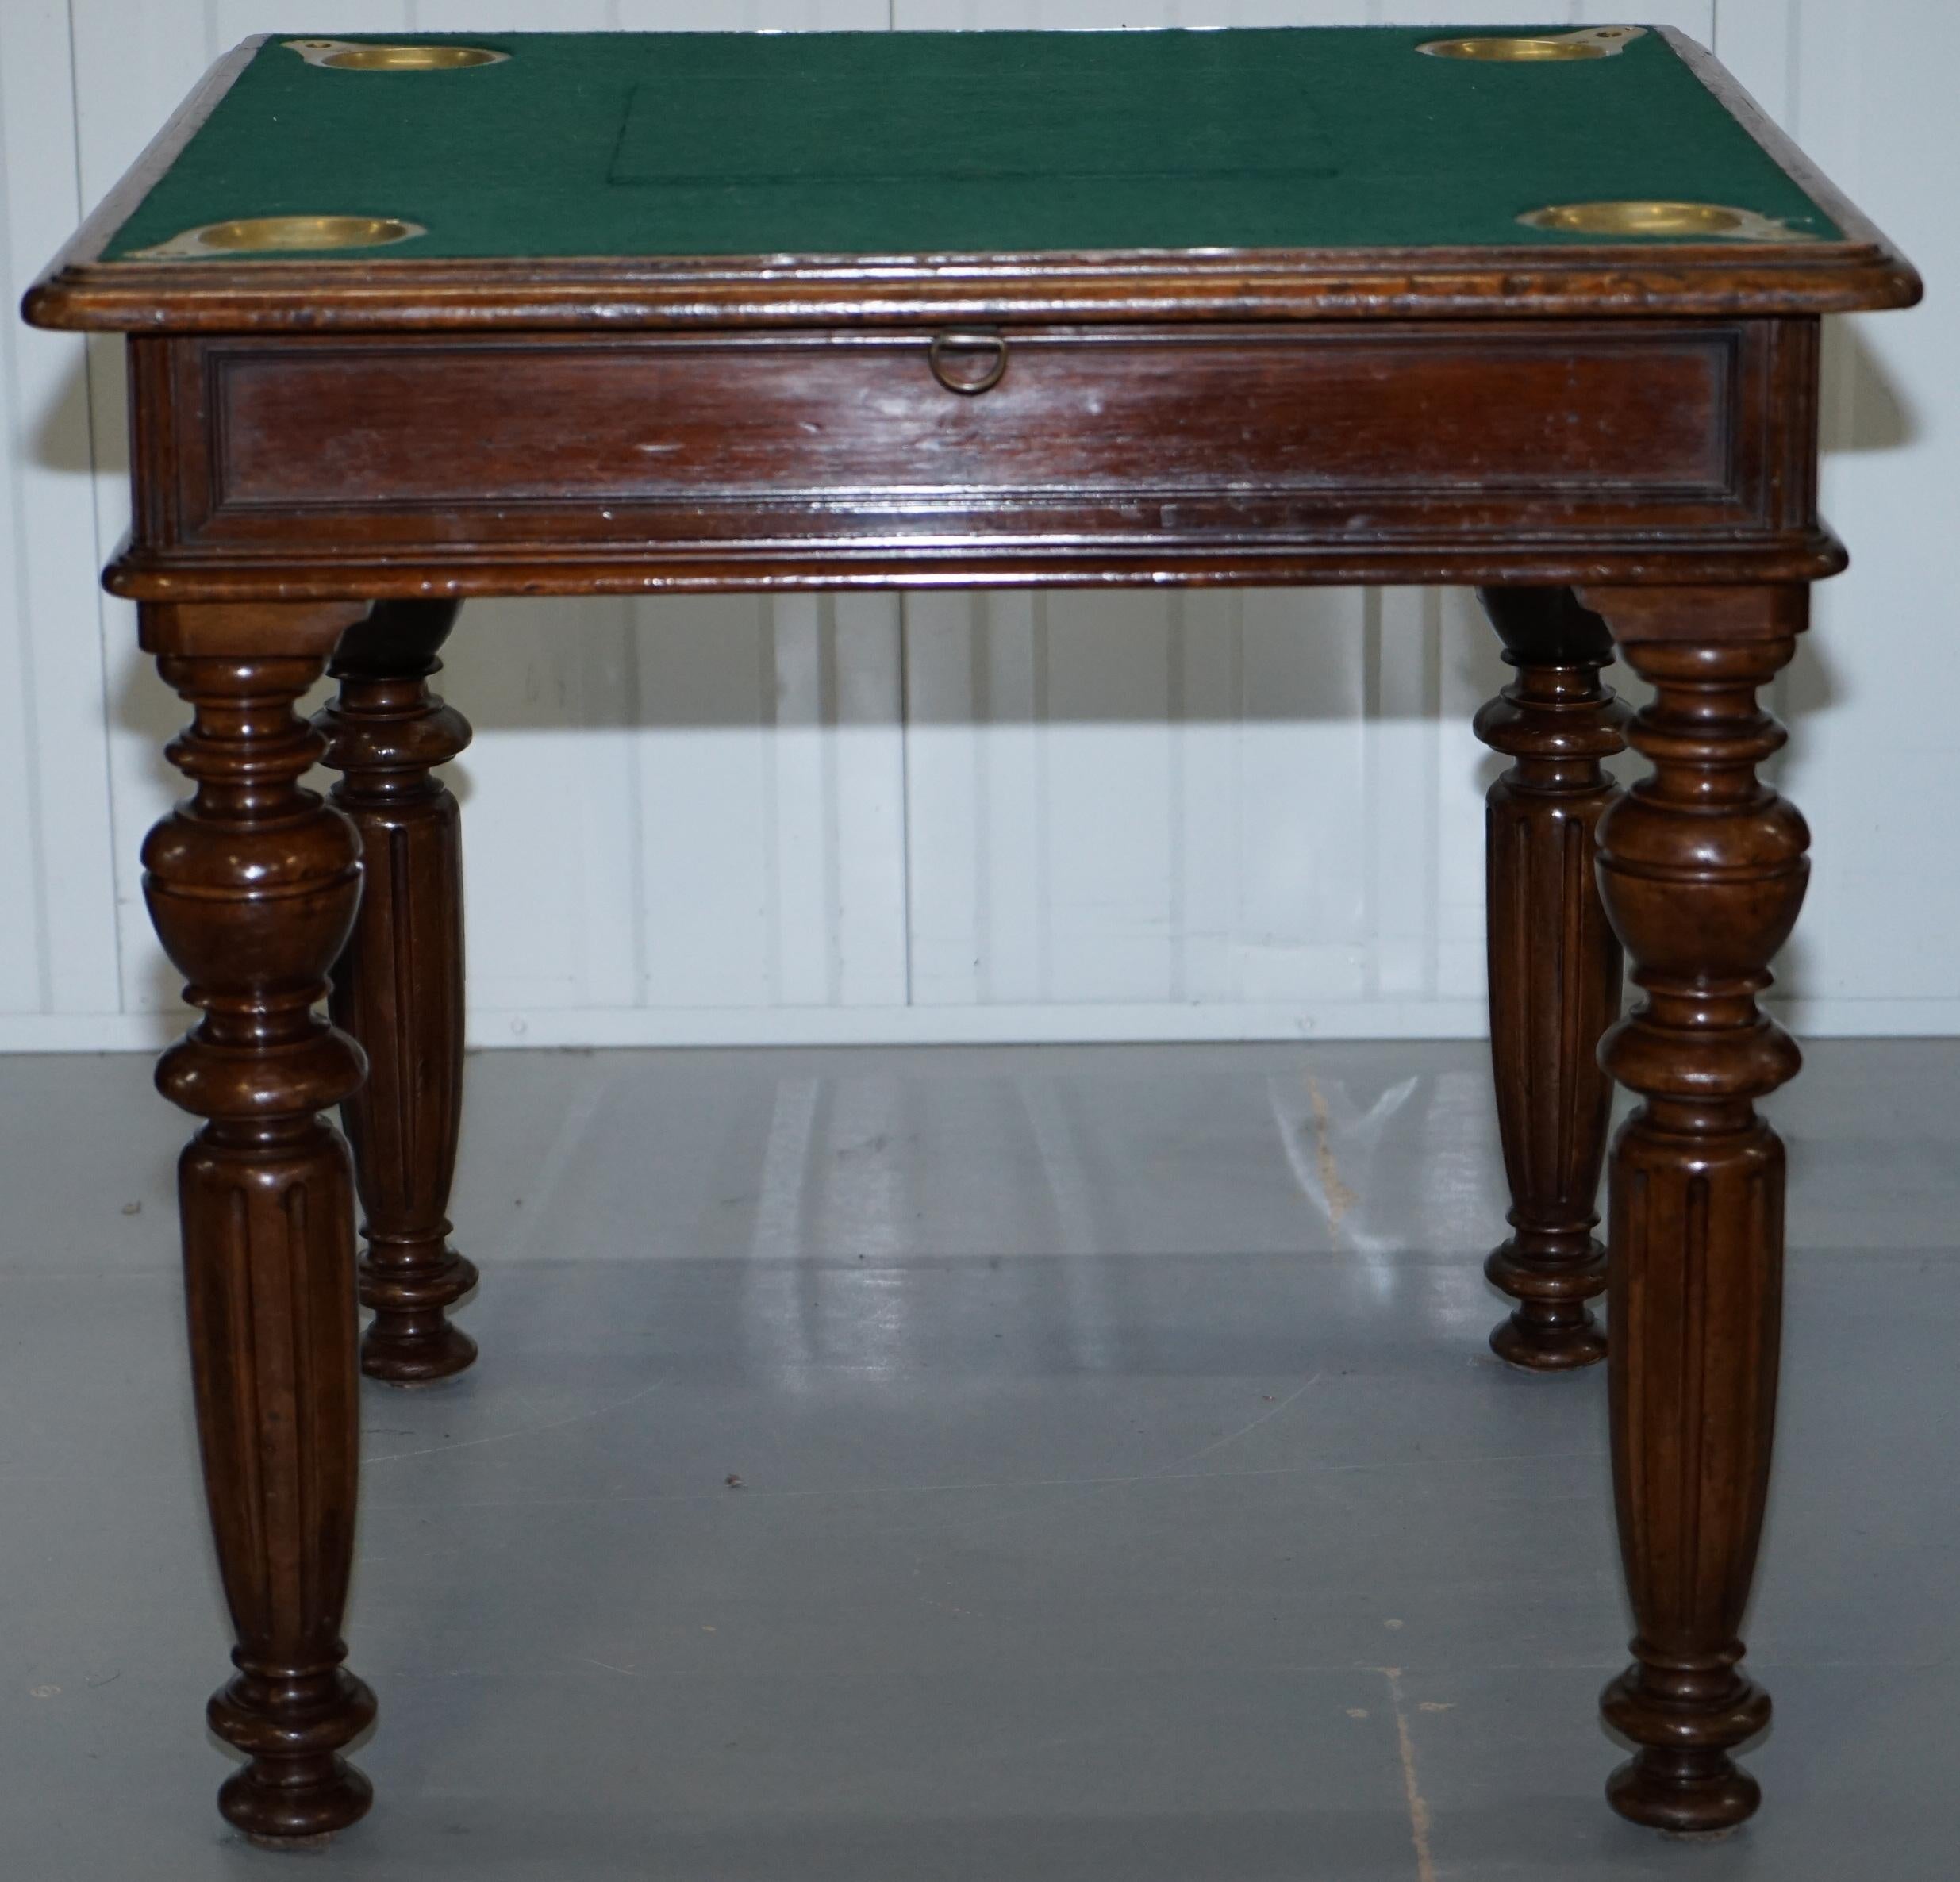 Rare Victorian Games Table circa 1840 Drop Middle Secret Drawers and Buttons For Sale 8